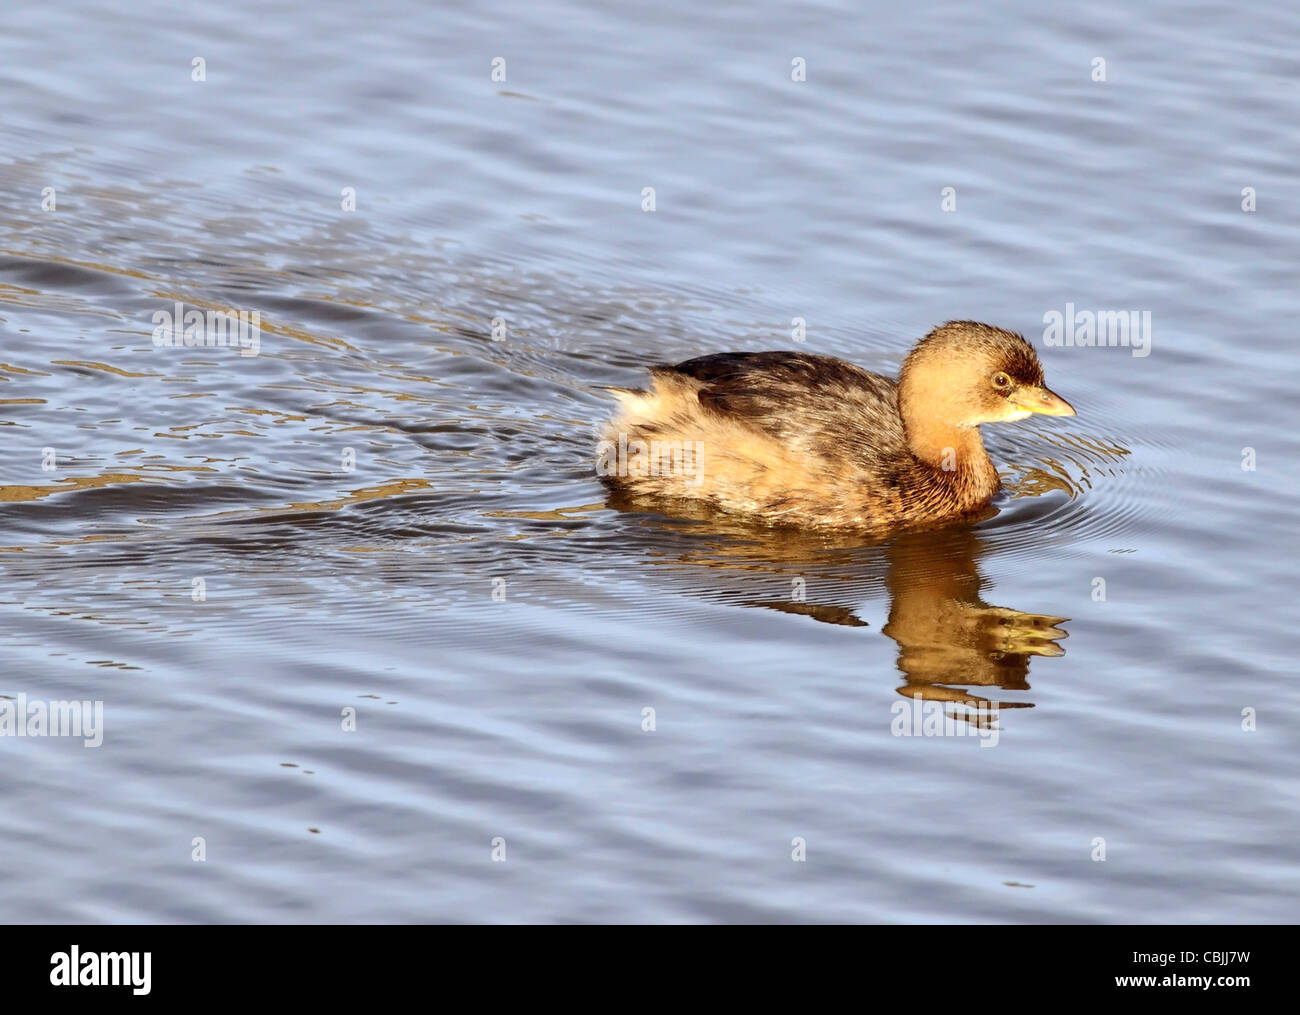 A Pied-billed Grebe duck (Podilymbus podiceps) seen here on the water. Stock Photo